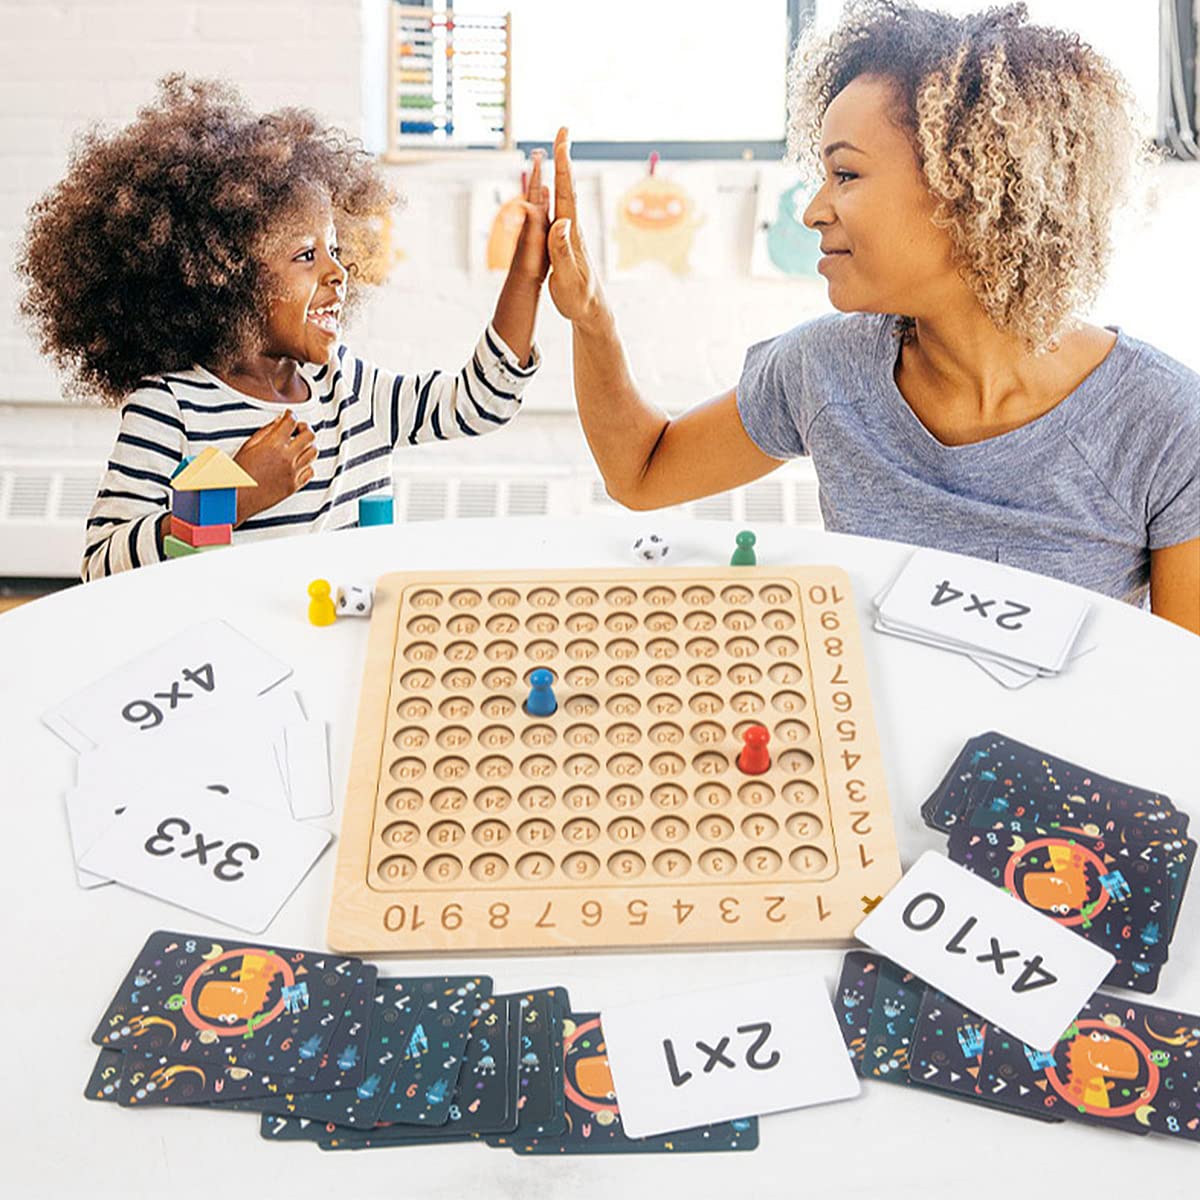 Keweis Wooden Montessori Multiplication Board Game with 100 Multiplication Flash Cards, Kids Math Counting Learning Toys Gift, Early Educational Learn Multiplication for Children Toddlers Kids